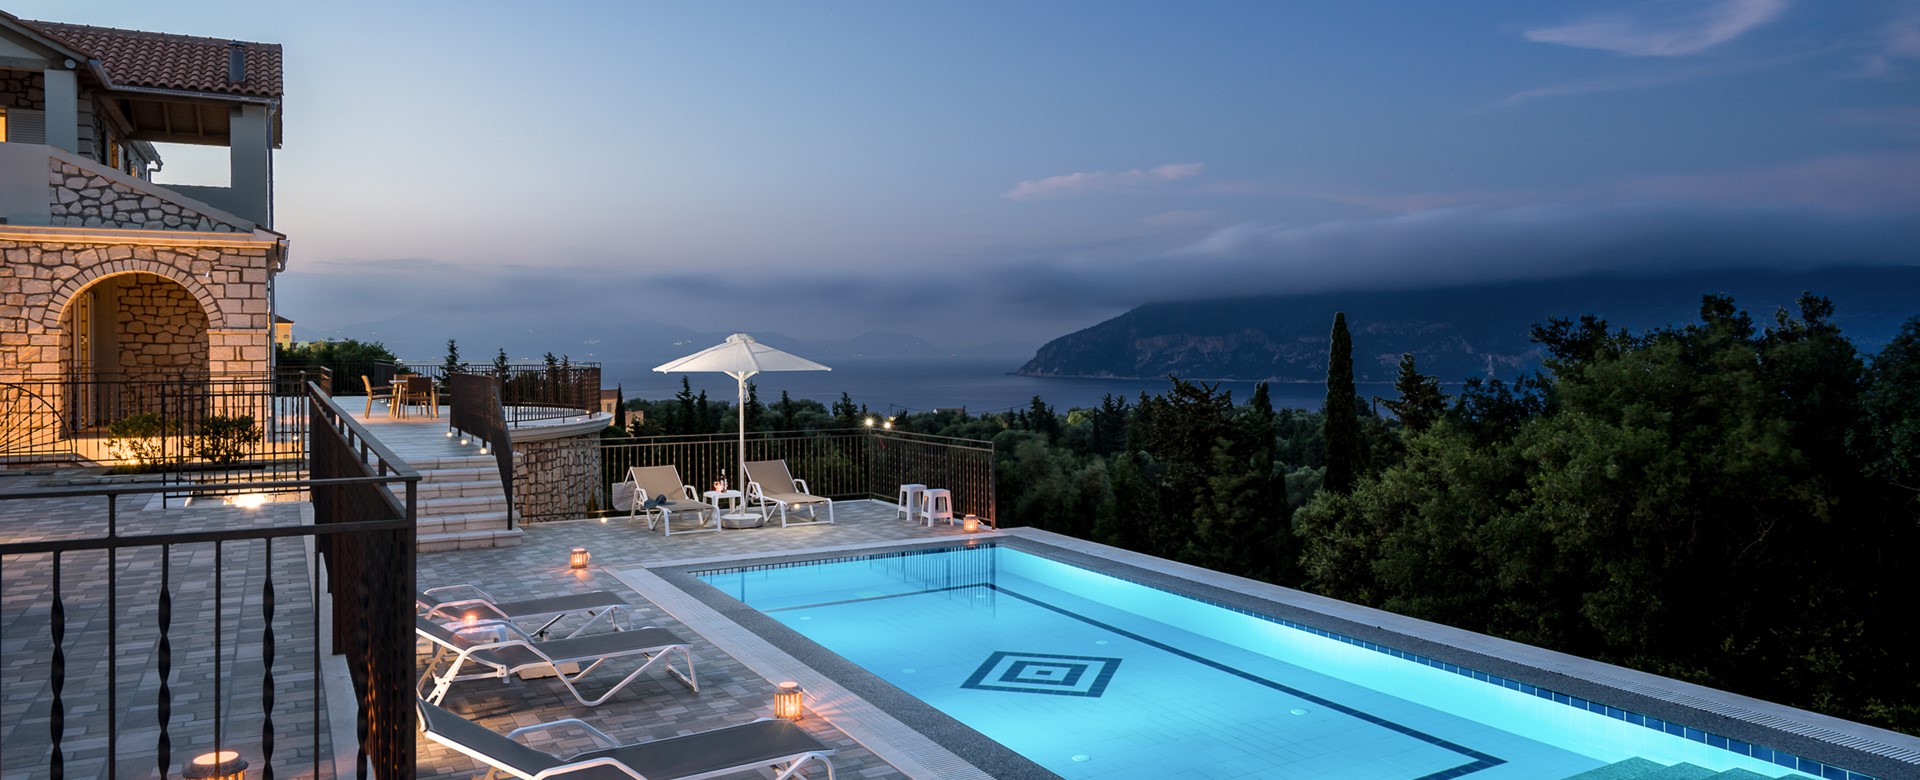 Stunning night time views across private pool to mountains at Villa Gionis Fiscardo, Kefalonia, Greek Islands